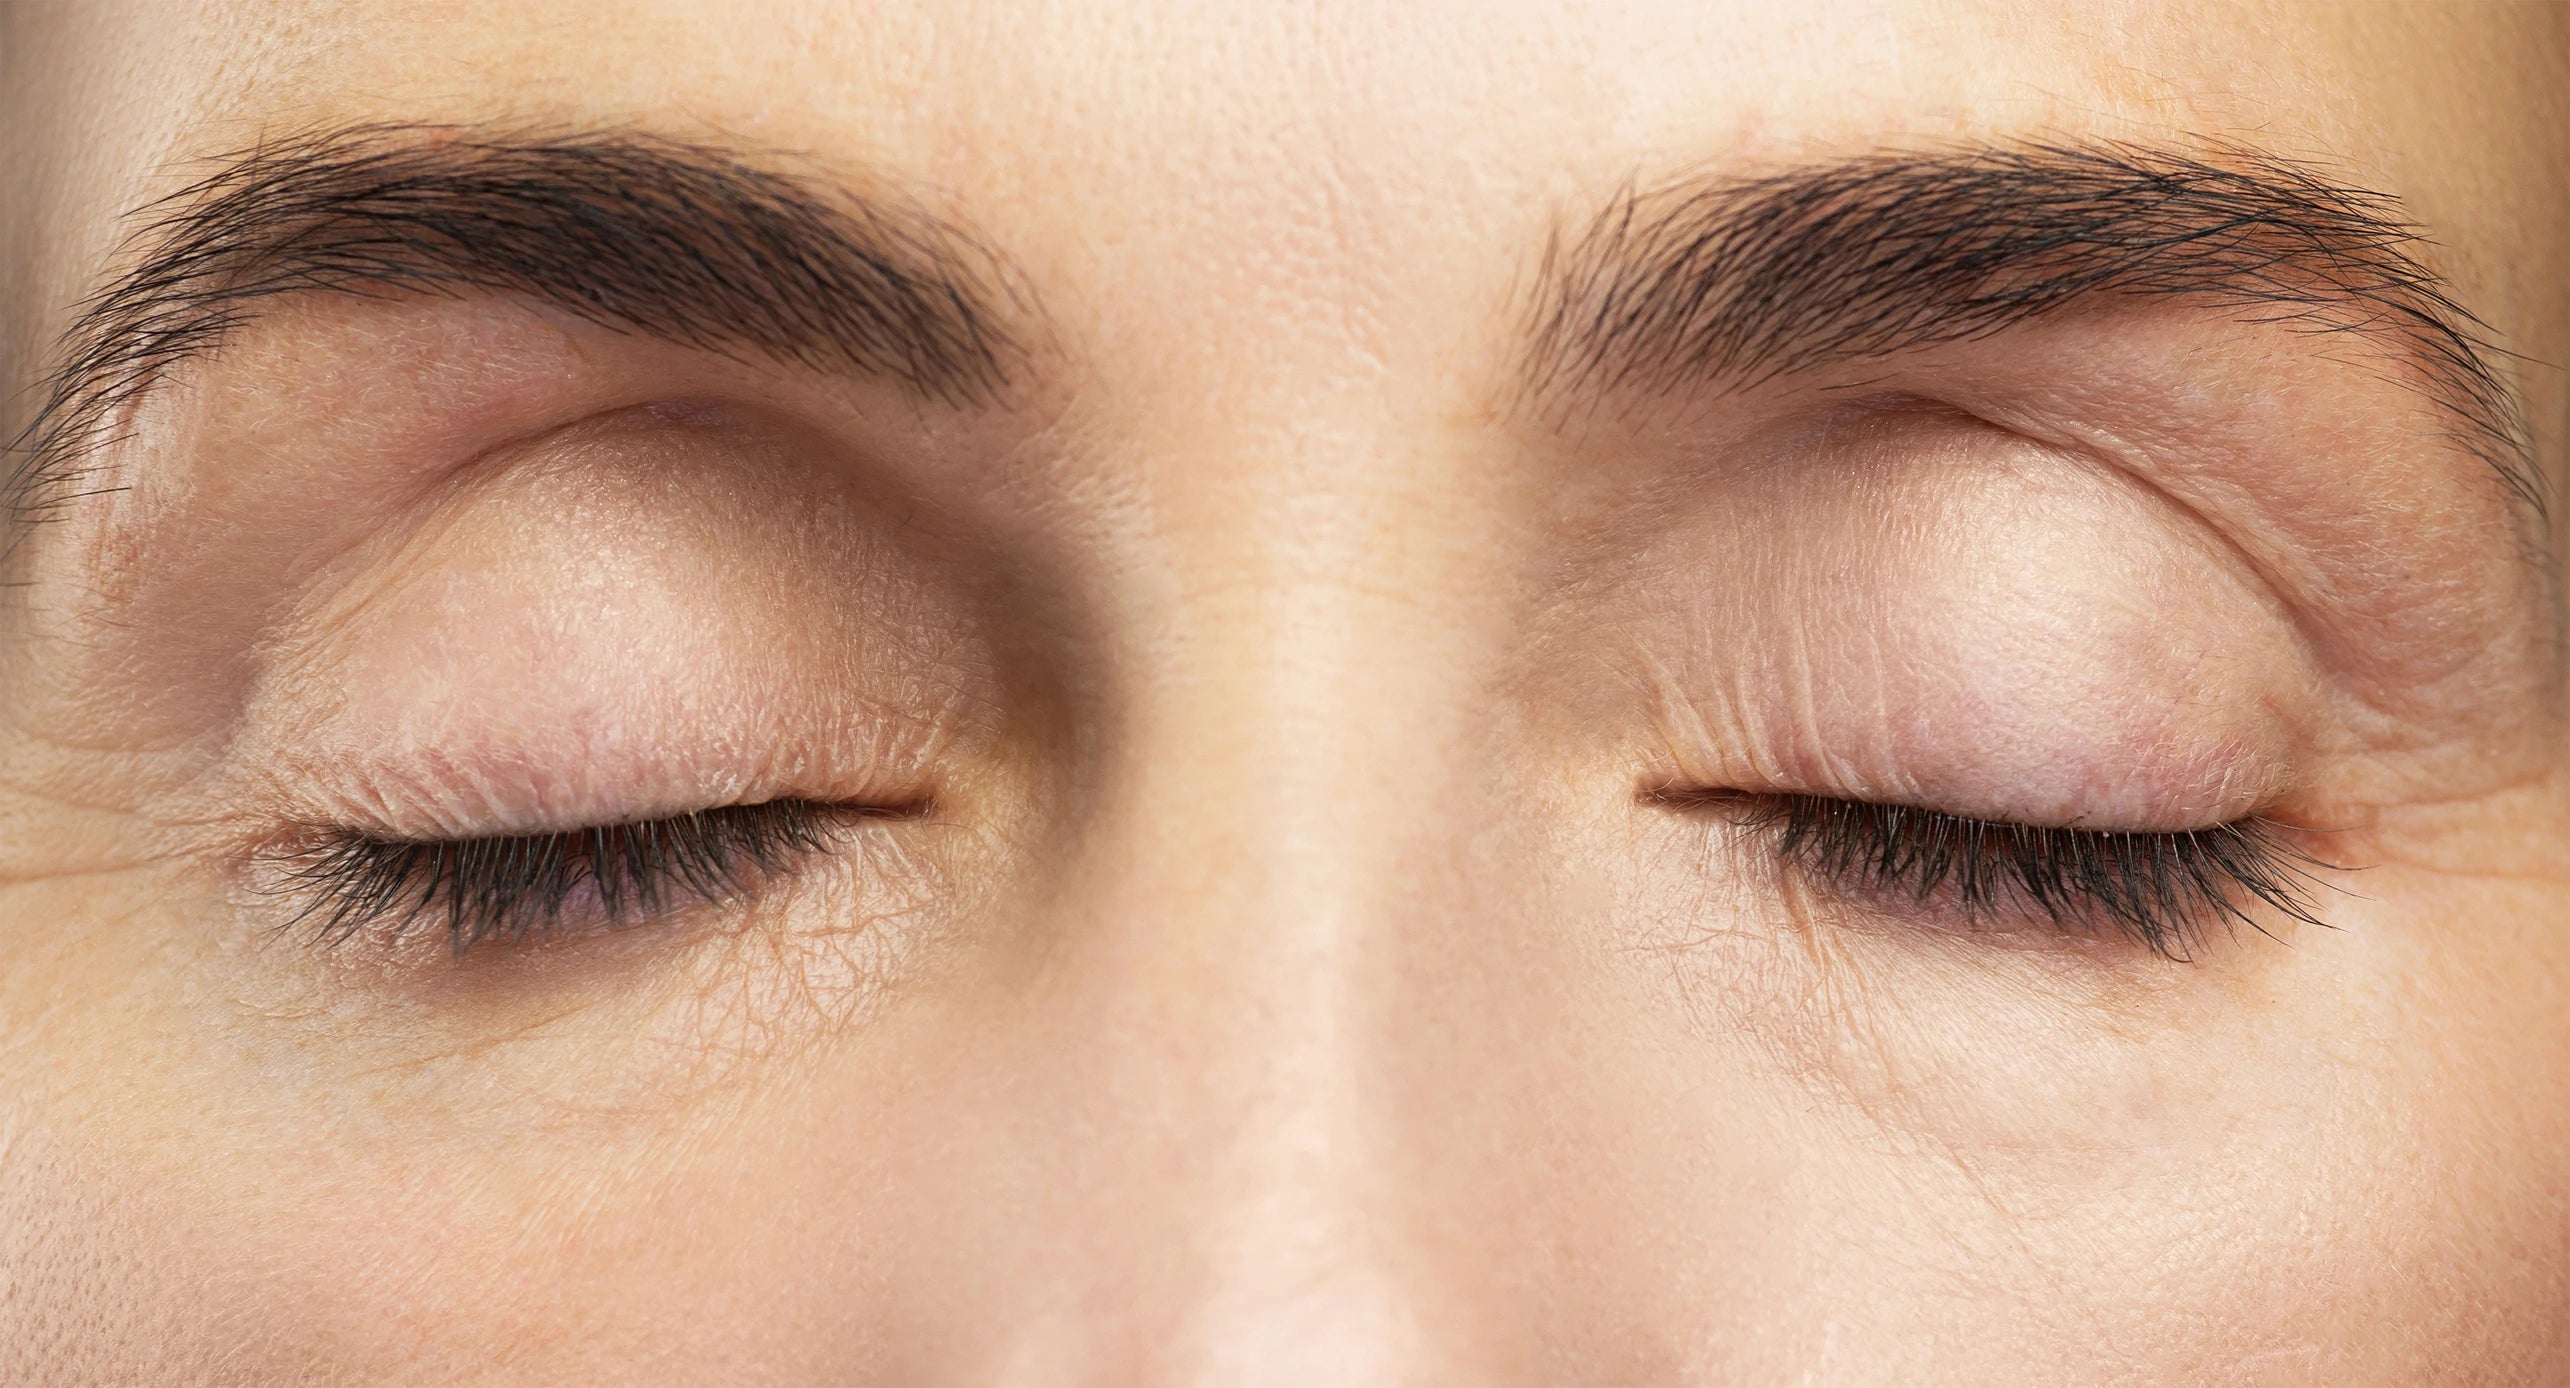 After treatment close-up of rejuvenated skin around the eye area with visibly reduced wrinkles and smoother texture.